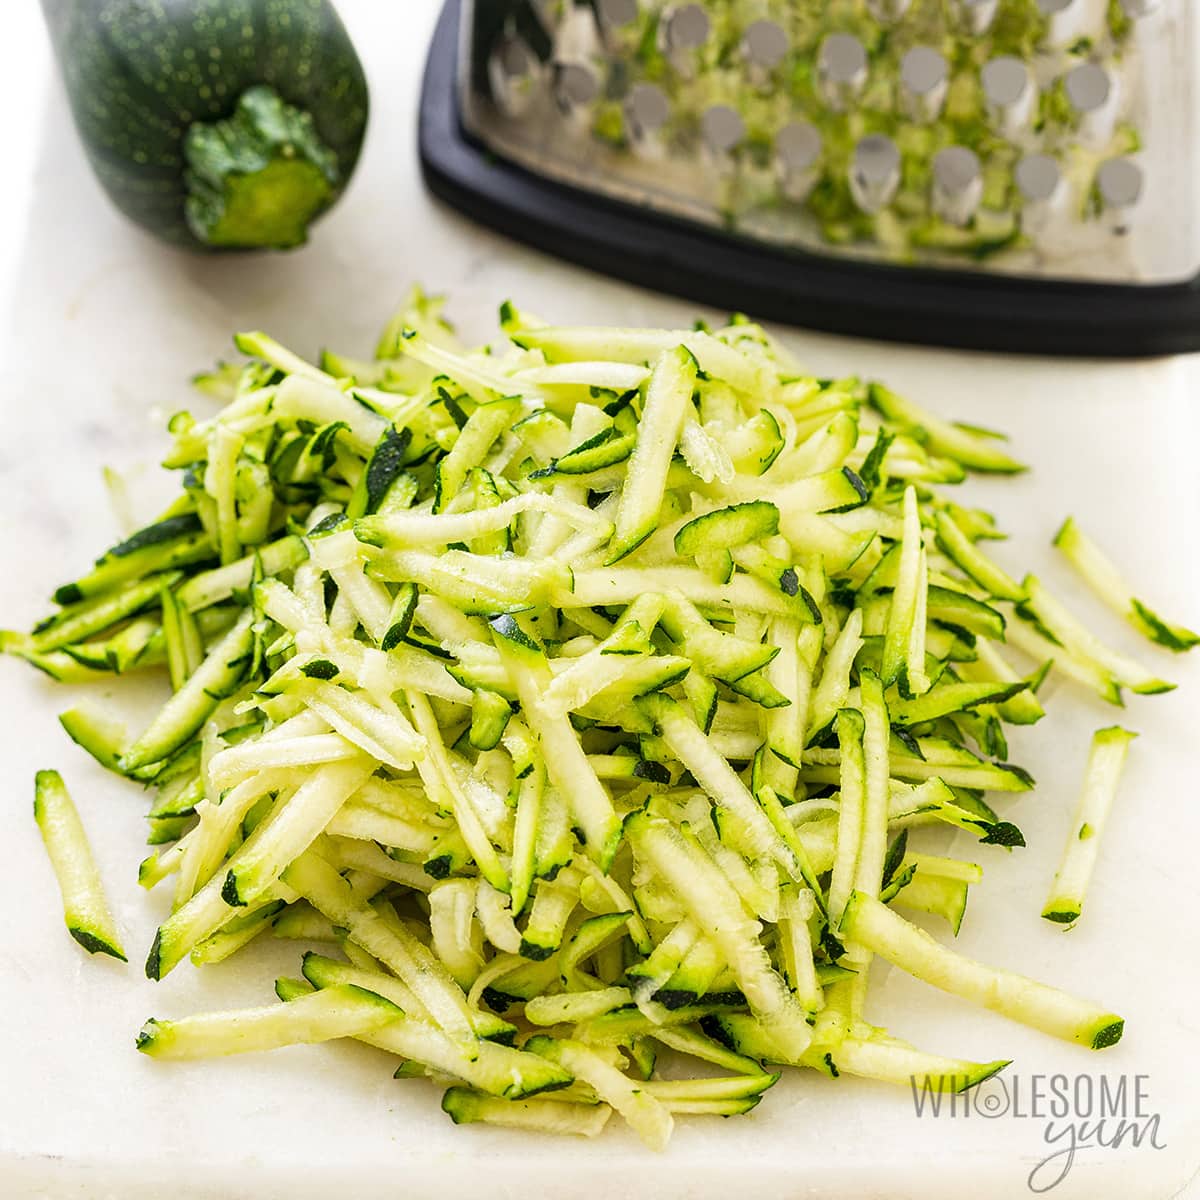 Zucchini shredded with a grater.